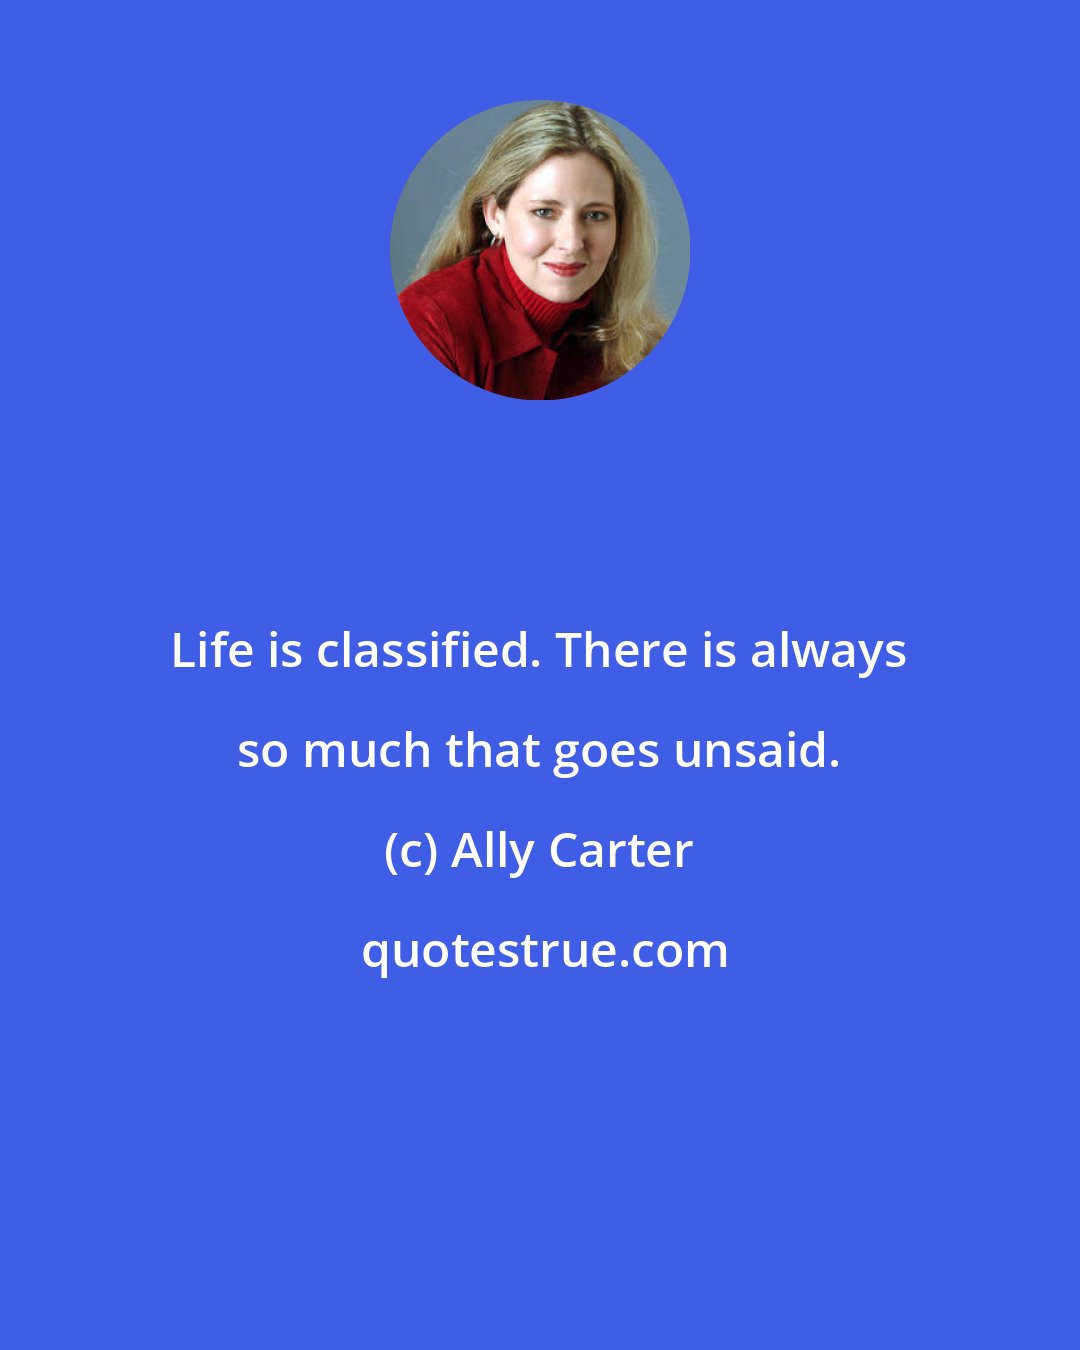 Ally Carter: Life is classified. There is always so much that goes unsaid.